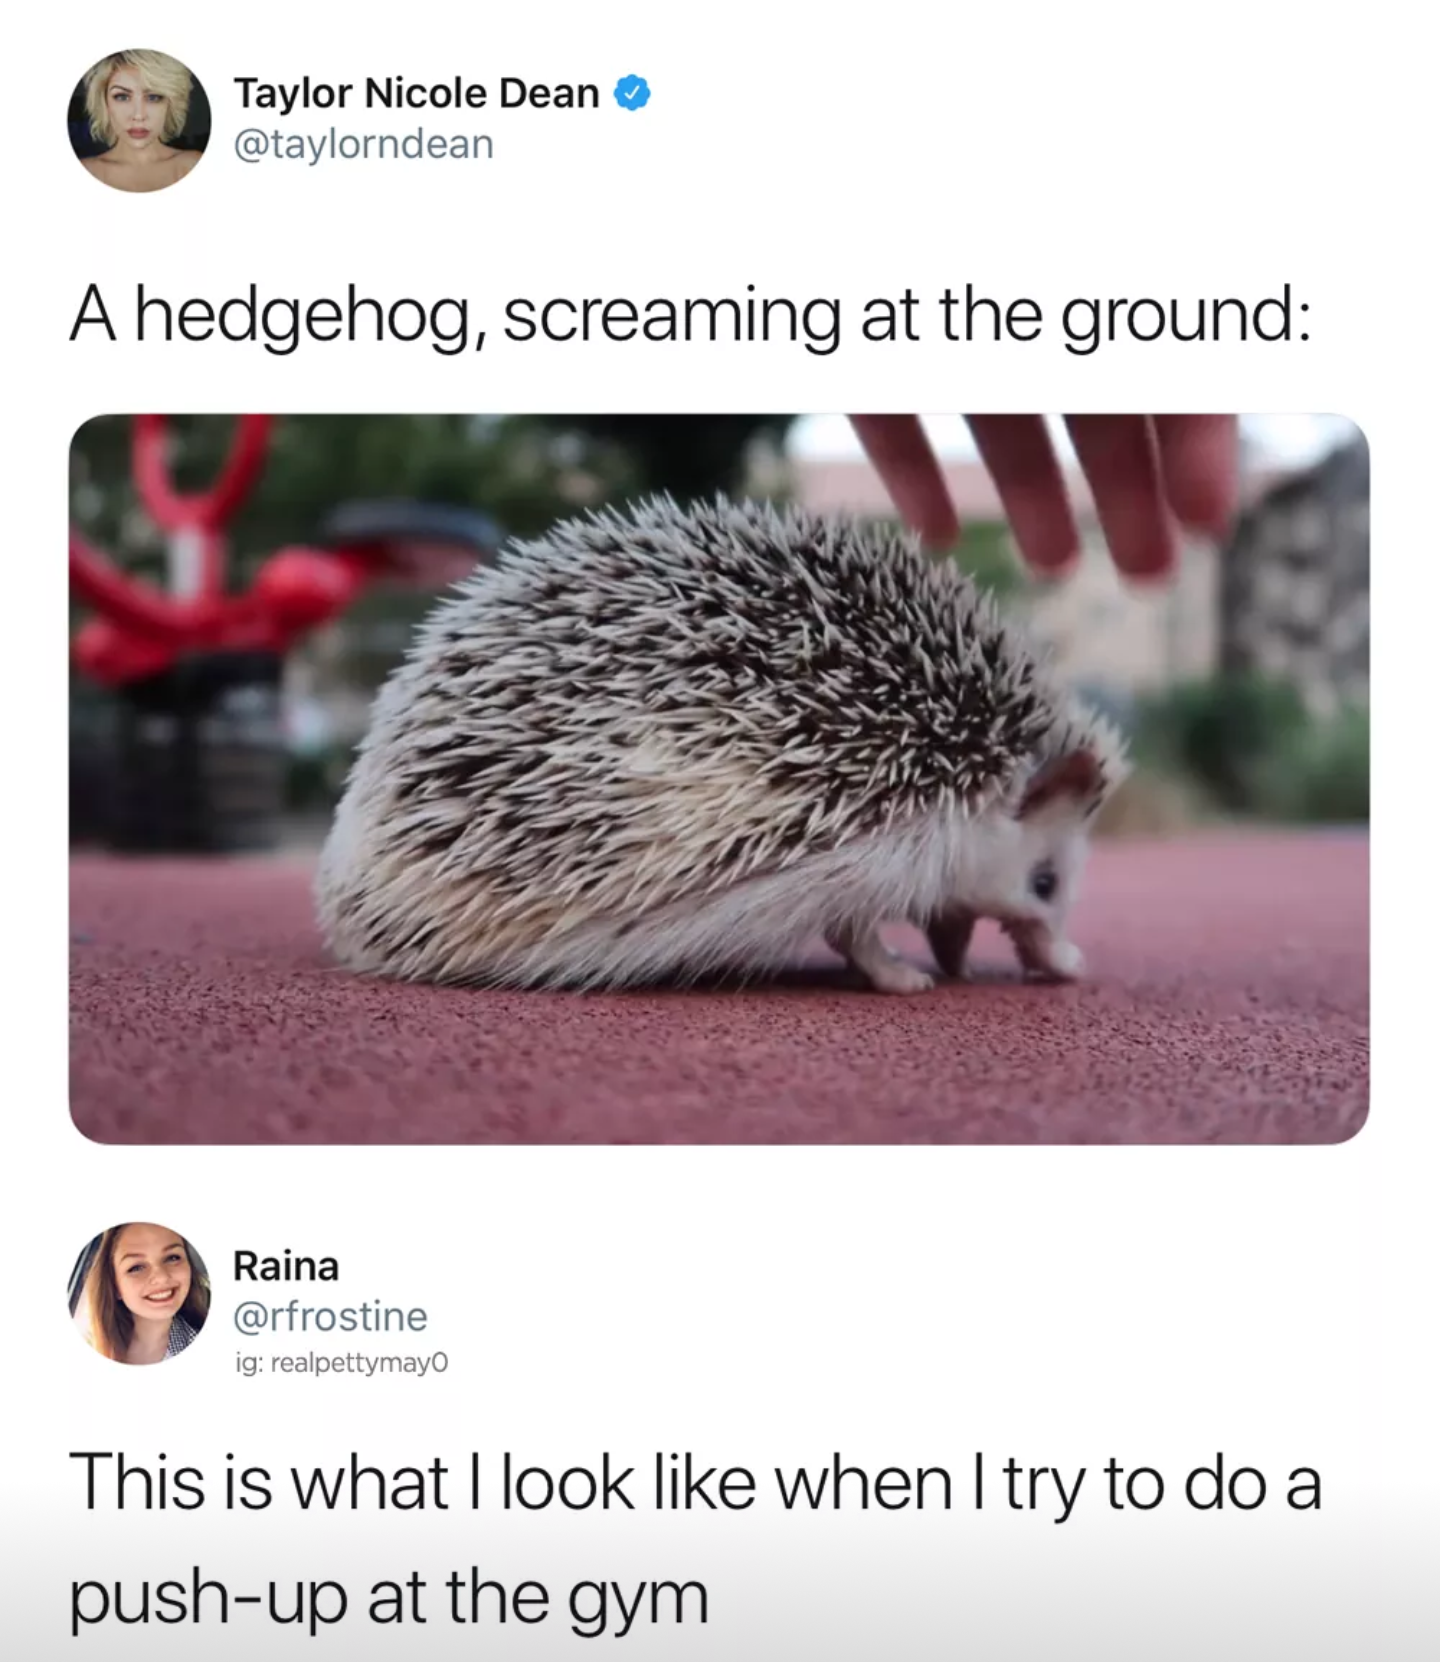 taylor nicole dean hedgehog - Taylor Nicole Dean A hedgehog, screaming at the ground Raina igralpettymayo This is what I look when I try to do a pushup at the gym